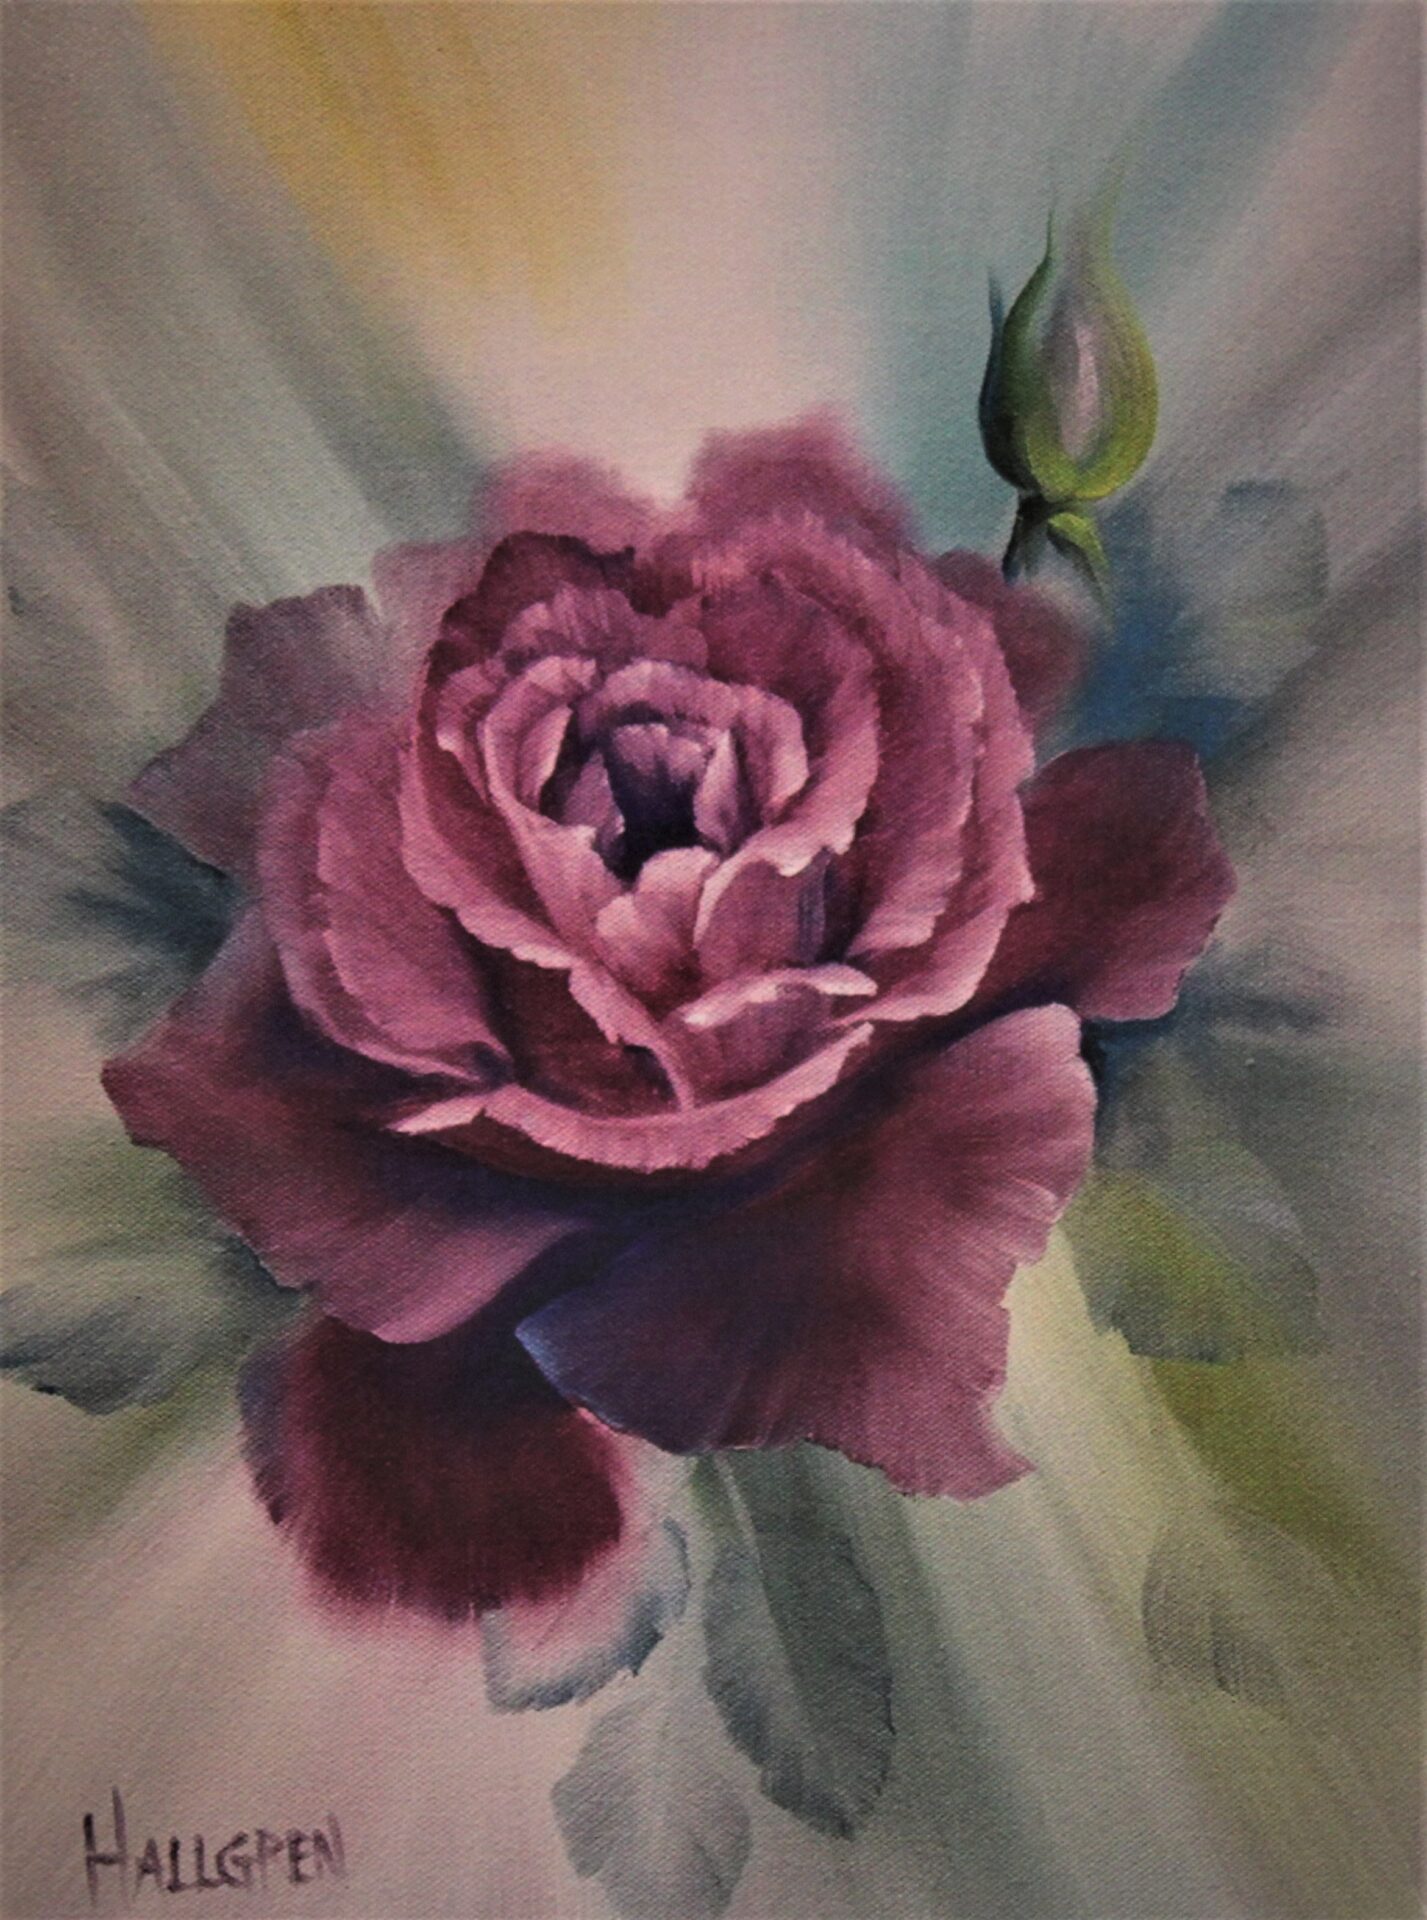 A rose painting with detailed petals